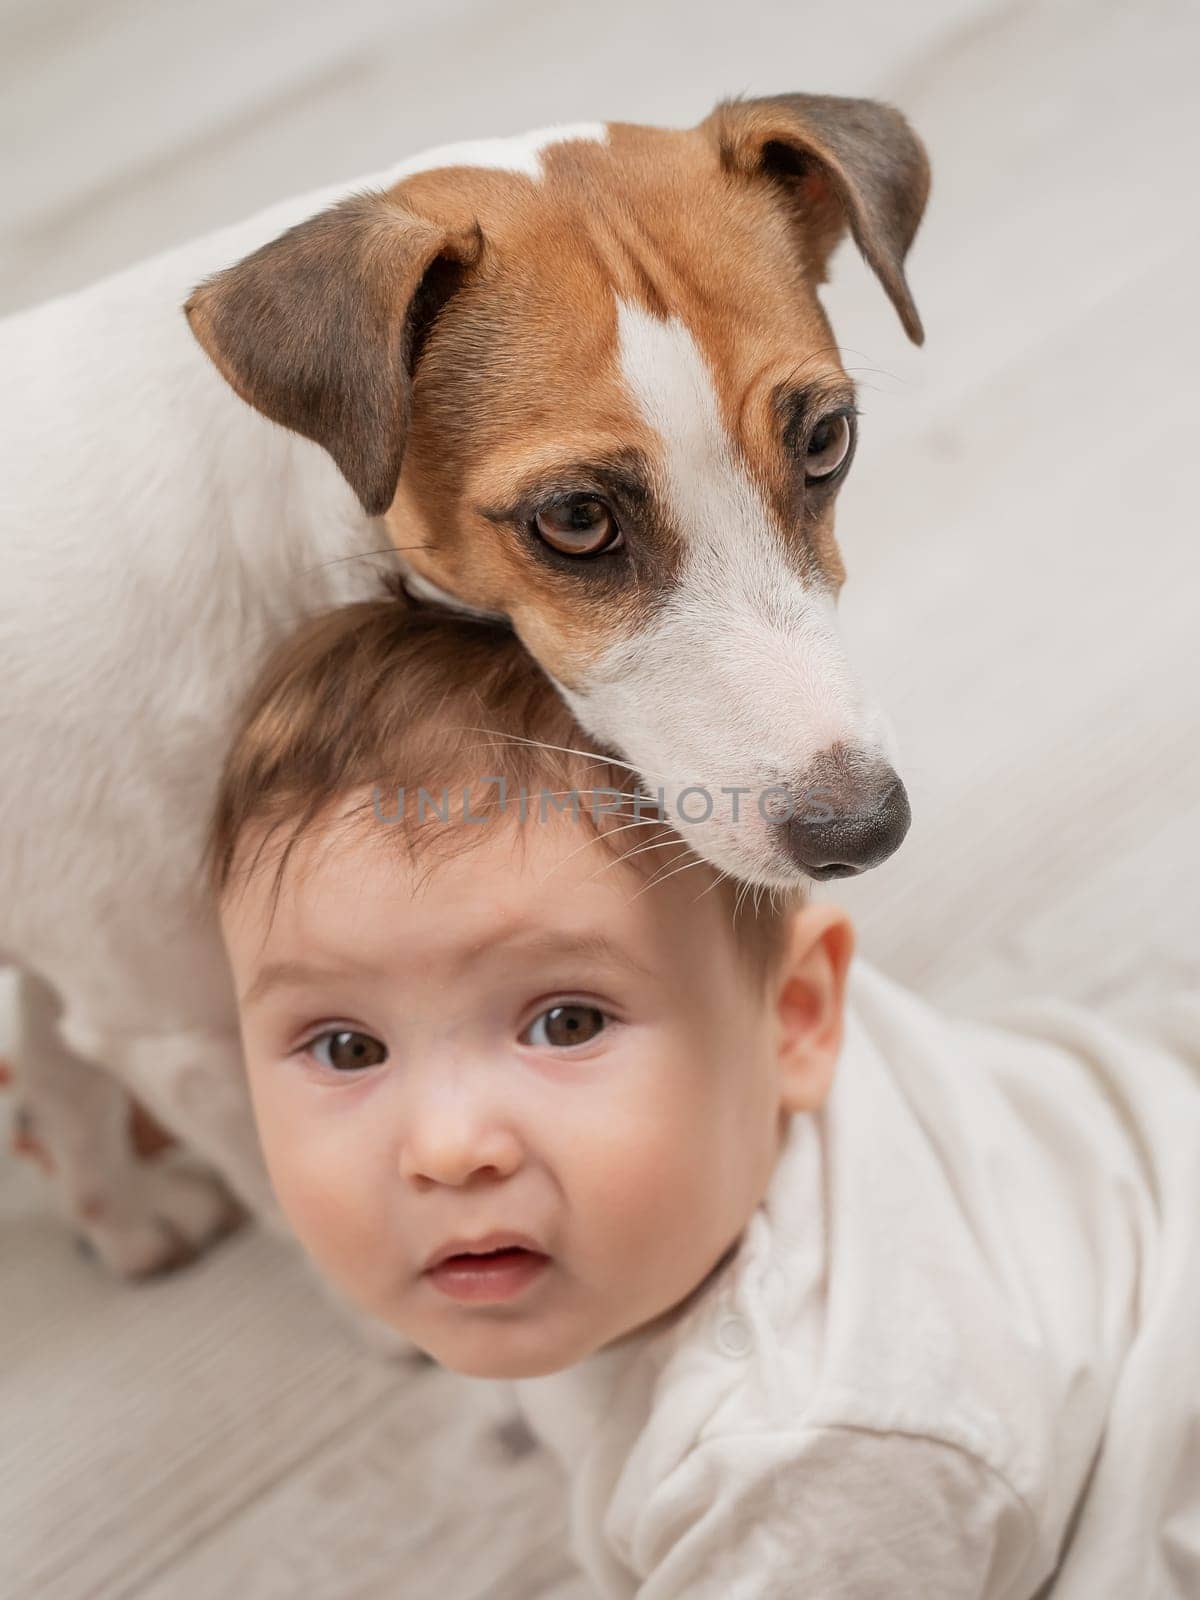 Cute baby boy and Jack Russell terrier dog lying in an embrace on a white background. Vertical photo. by mrwed54